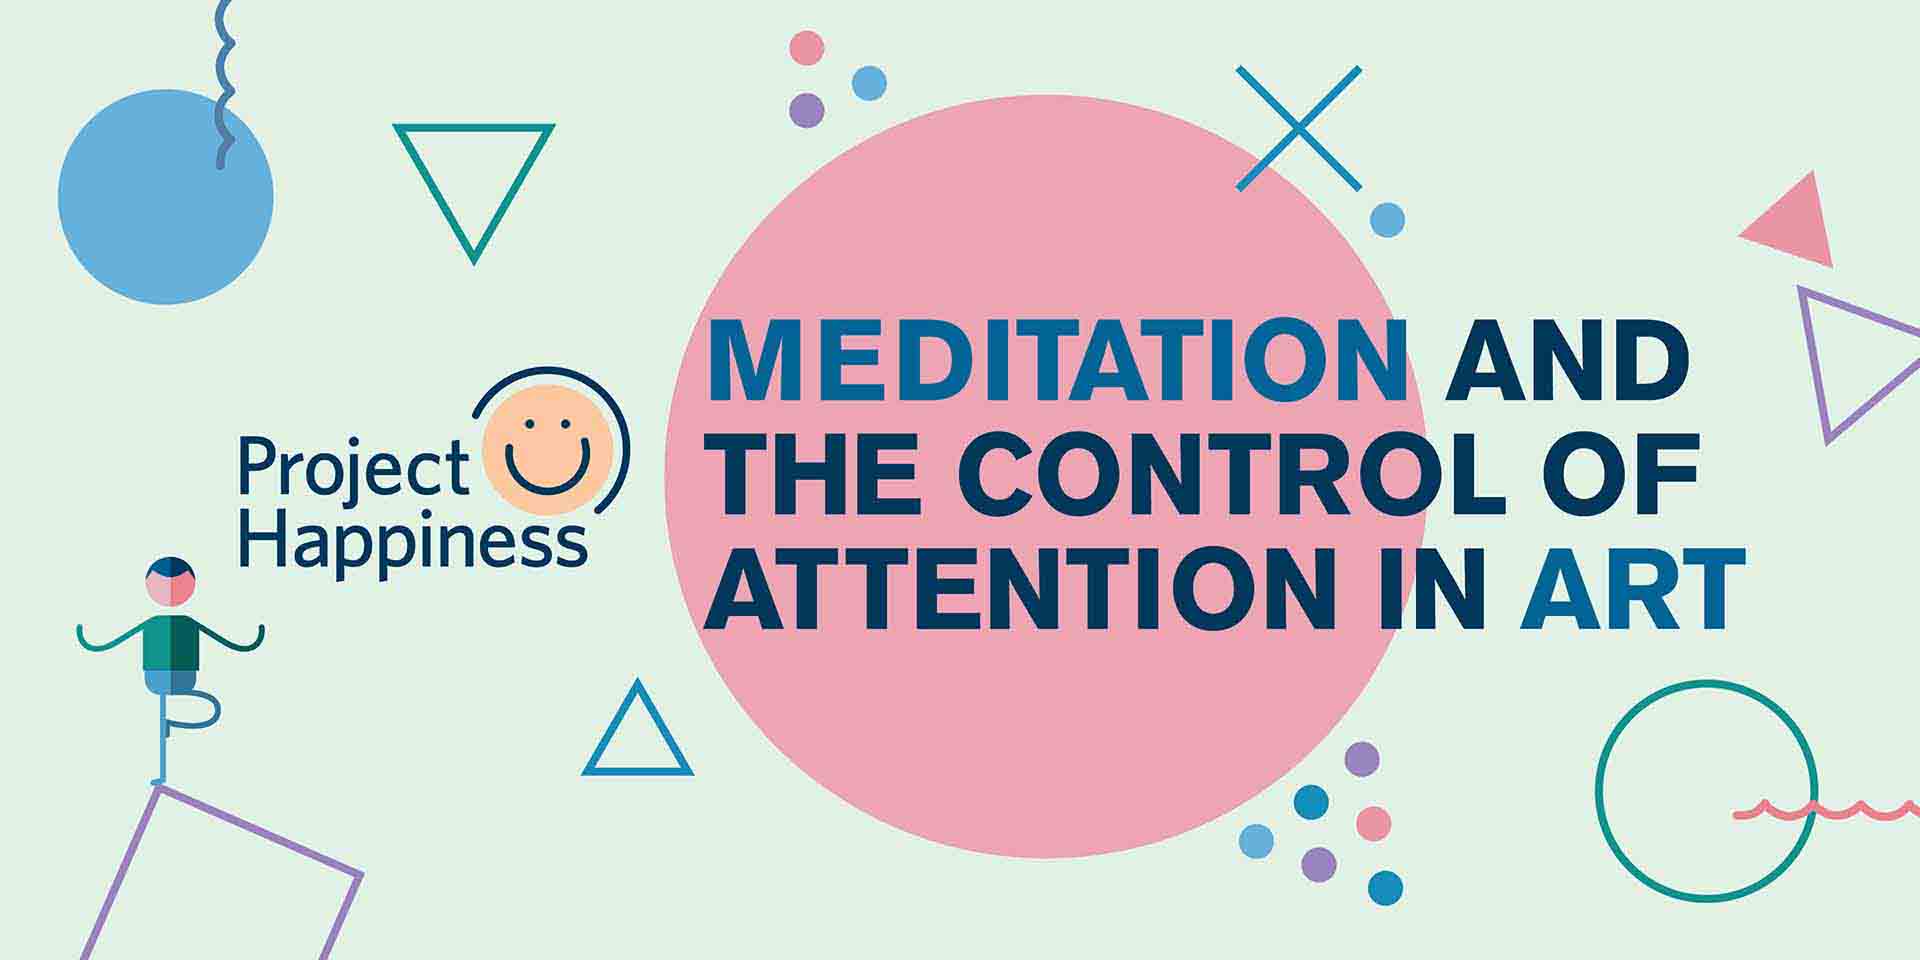 Meditation and the Control of Attention in Art